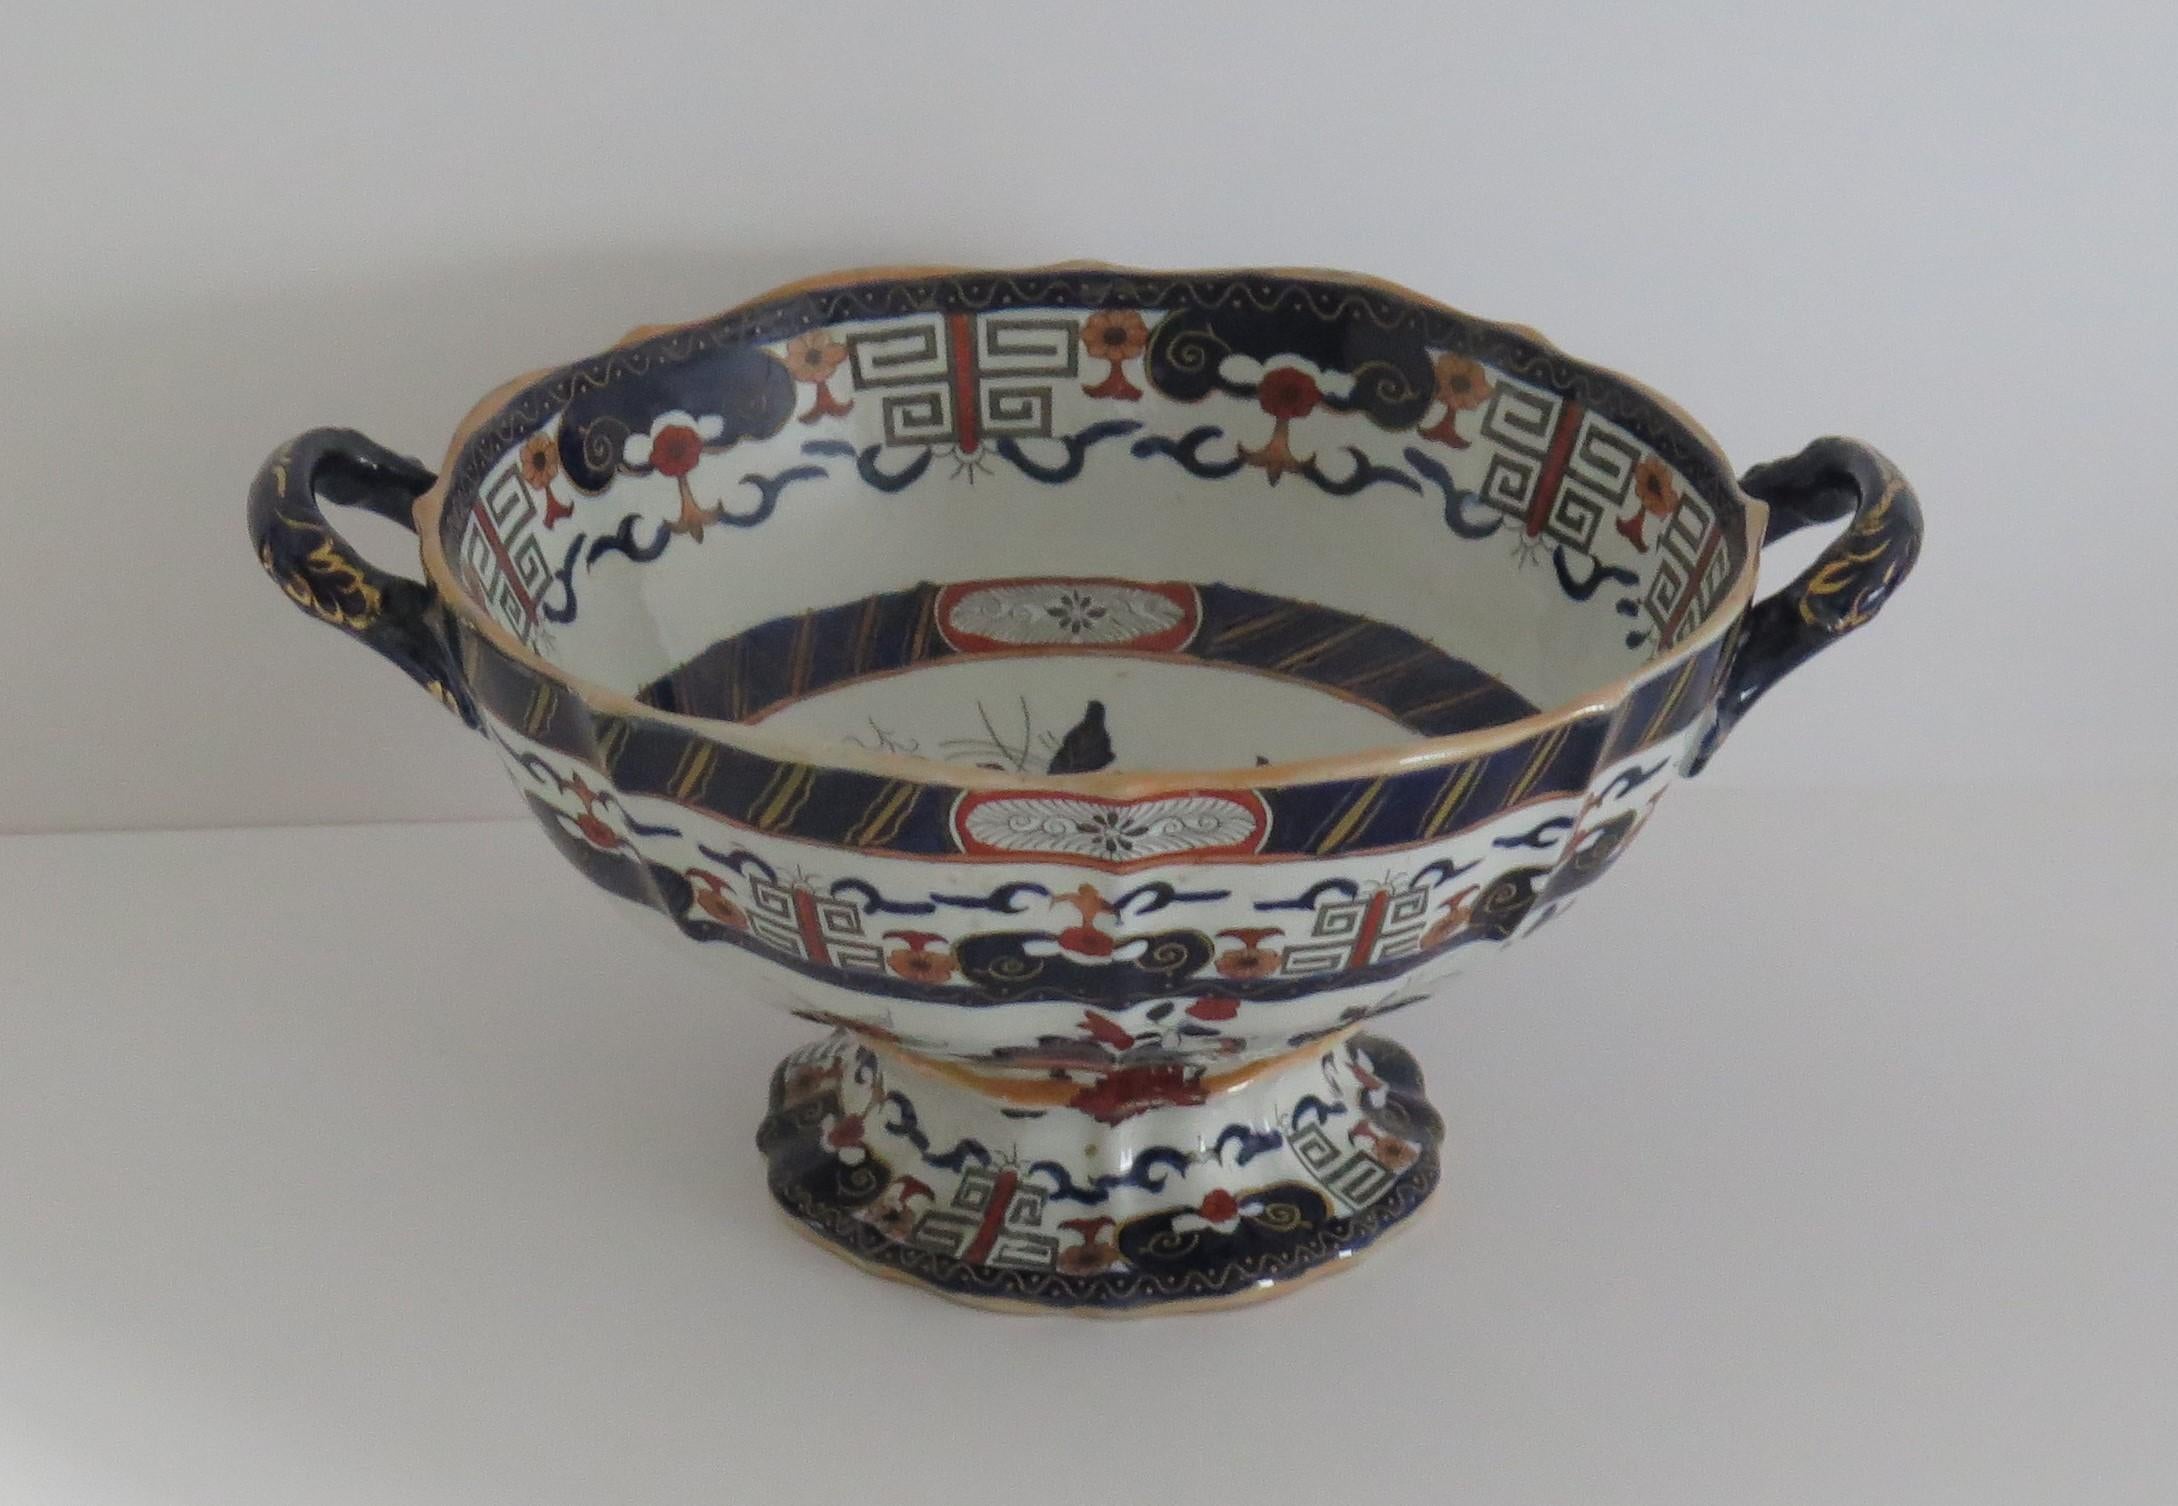 This is a Large twin Handled open Bowl made by Mason's Ironstone in Pattern 2508, called: Floral with Key Border pattern, in the early 19th century, circa 1835 to 1840..

Large Mason's bowls in this shape with a Pedestel foot are rare. 

The bowl is